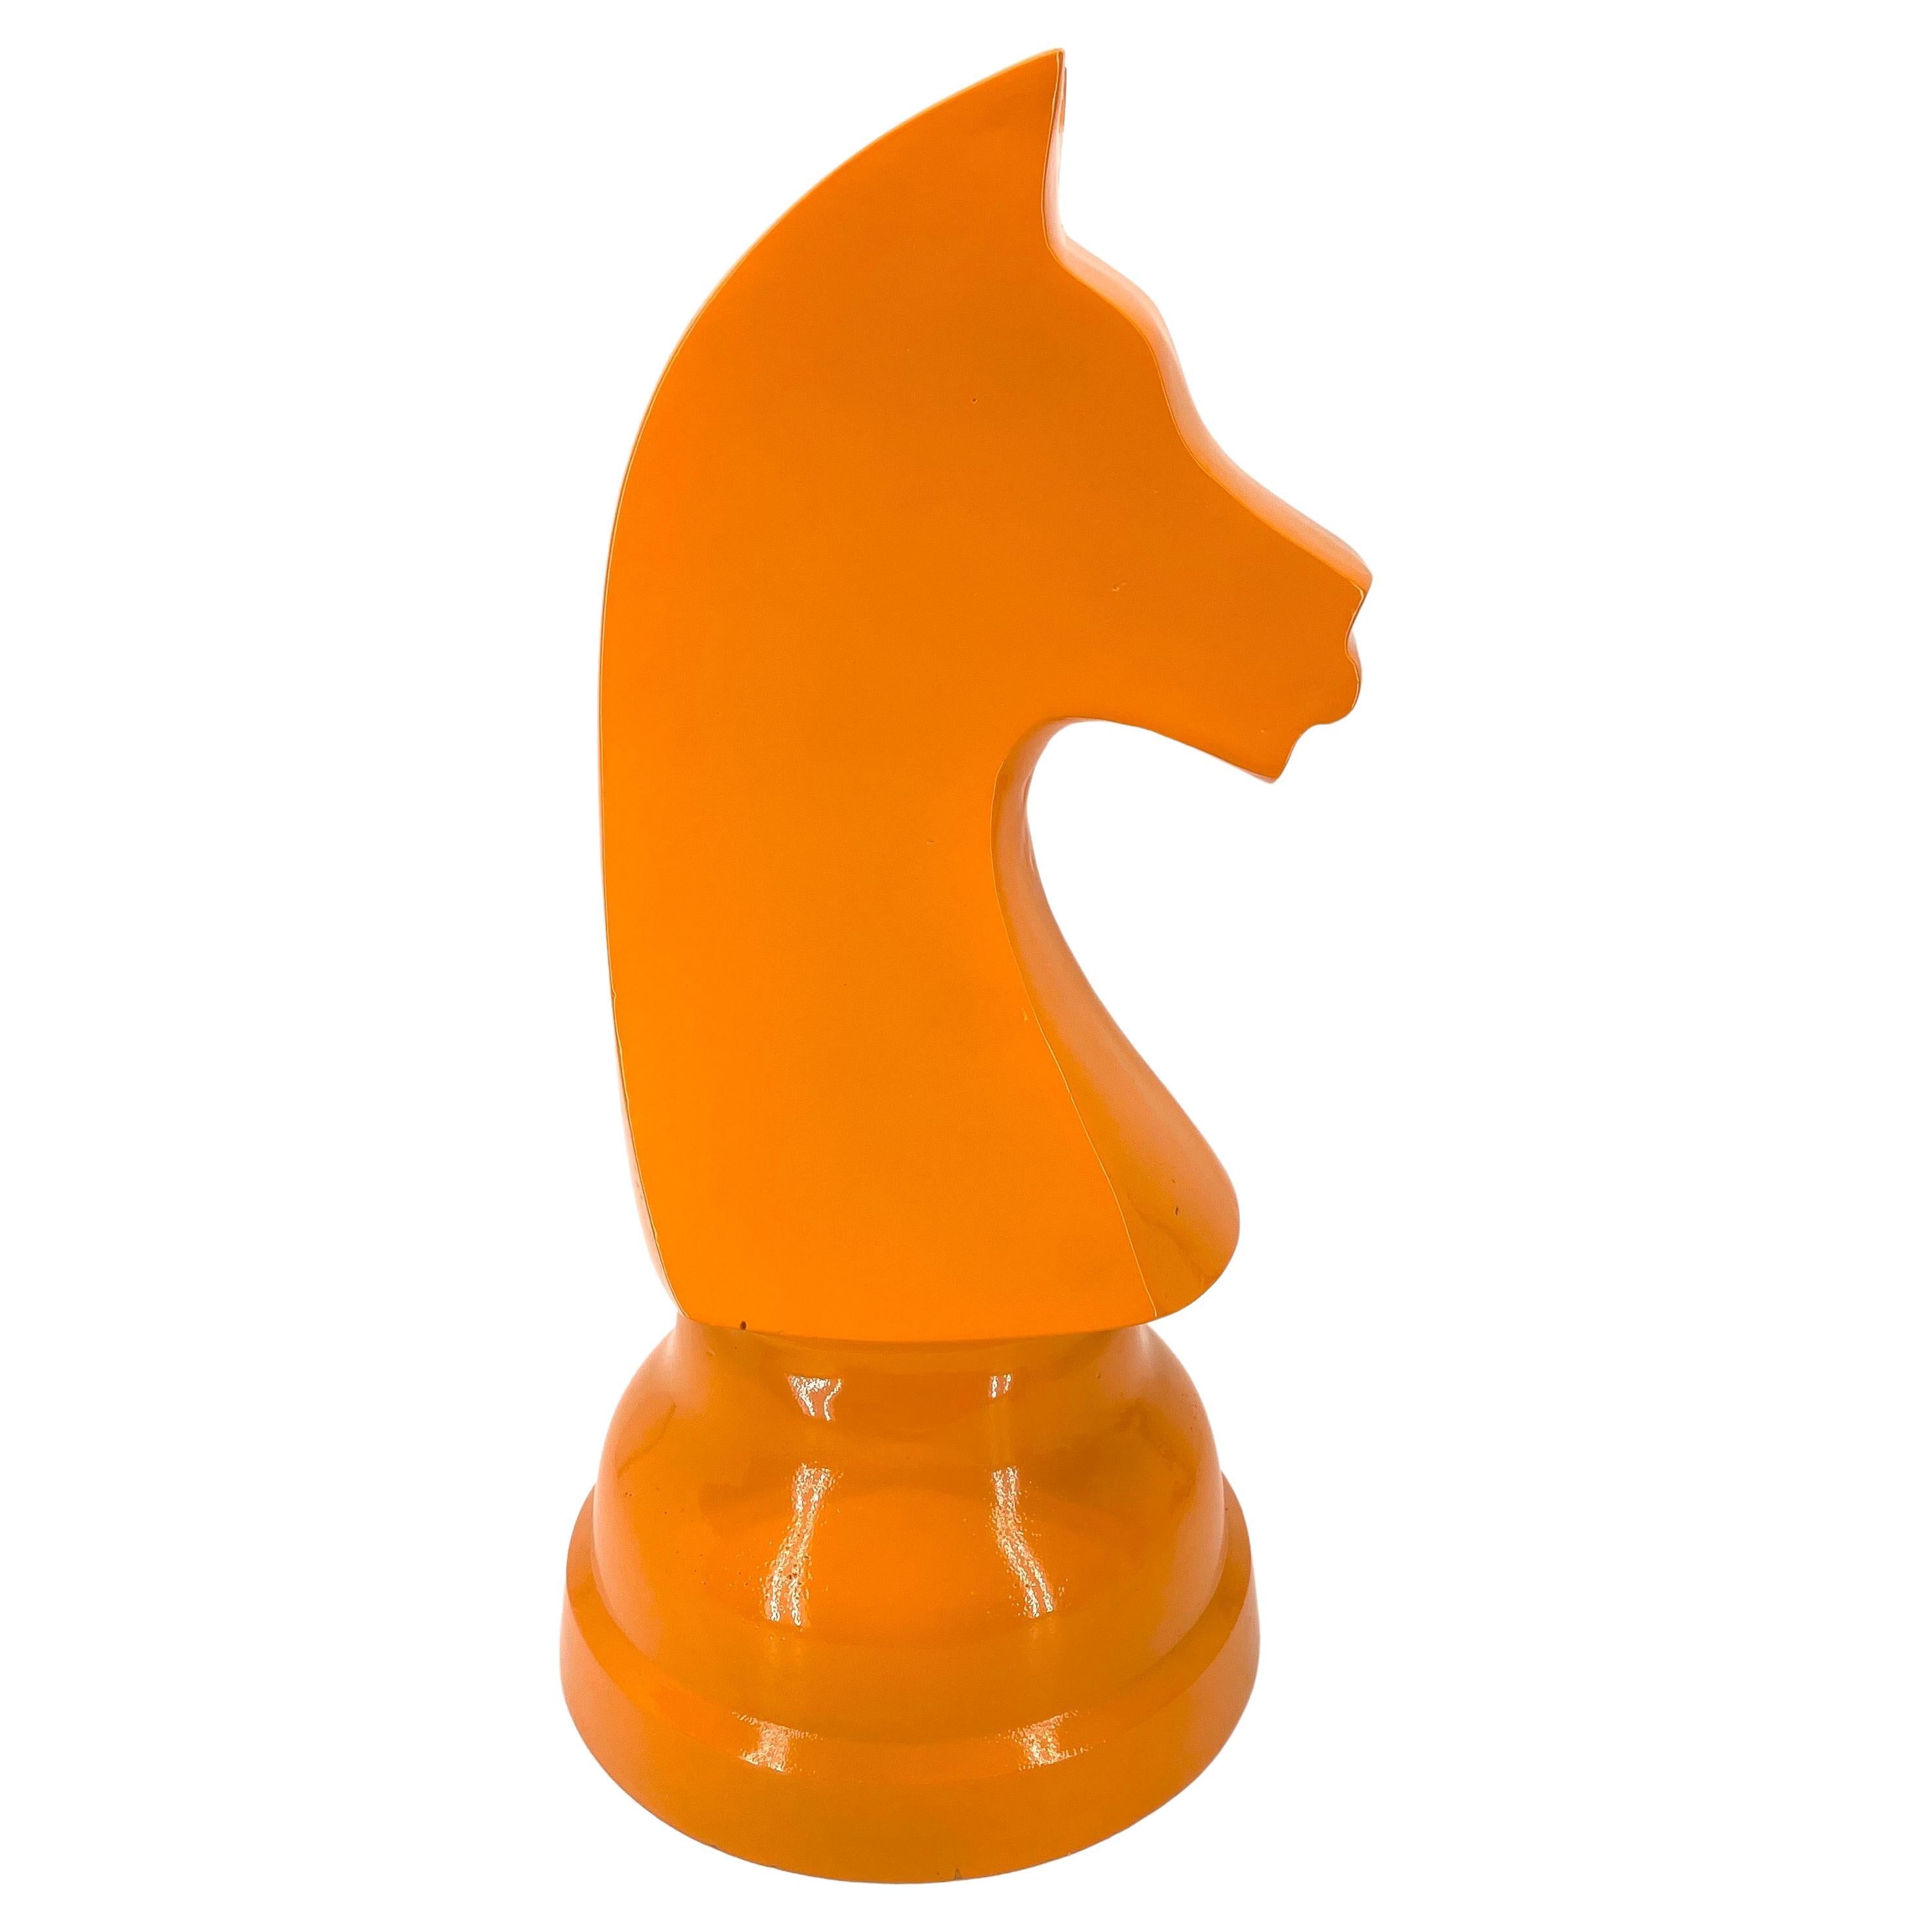 Decorative Cast Aluminum Powder-Coated Chess Piece Horse Head Statue

Stylish and aesthetically pleasing, this large figure has been freshly powder-coated in a shade we call classic Hermes Orange. Standing 20 1/2 inches tall this statement piece is